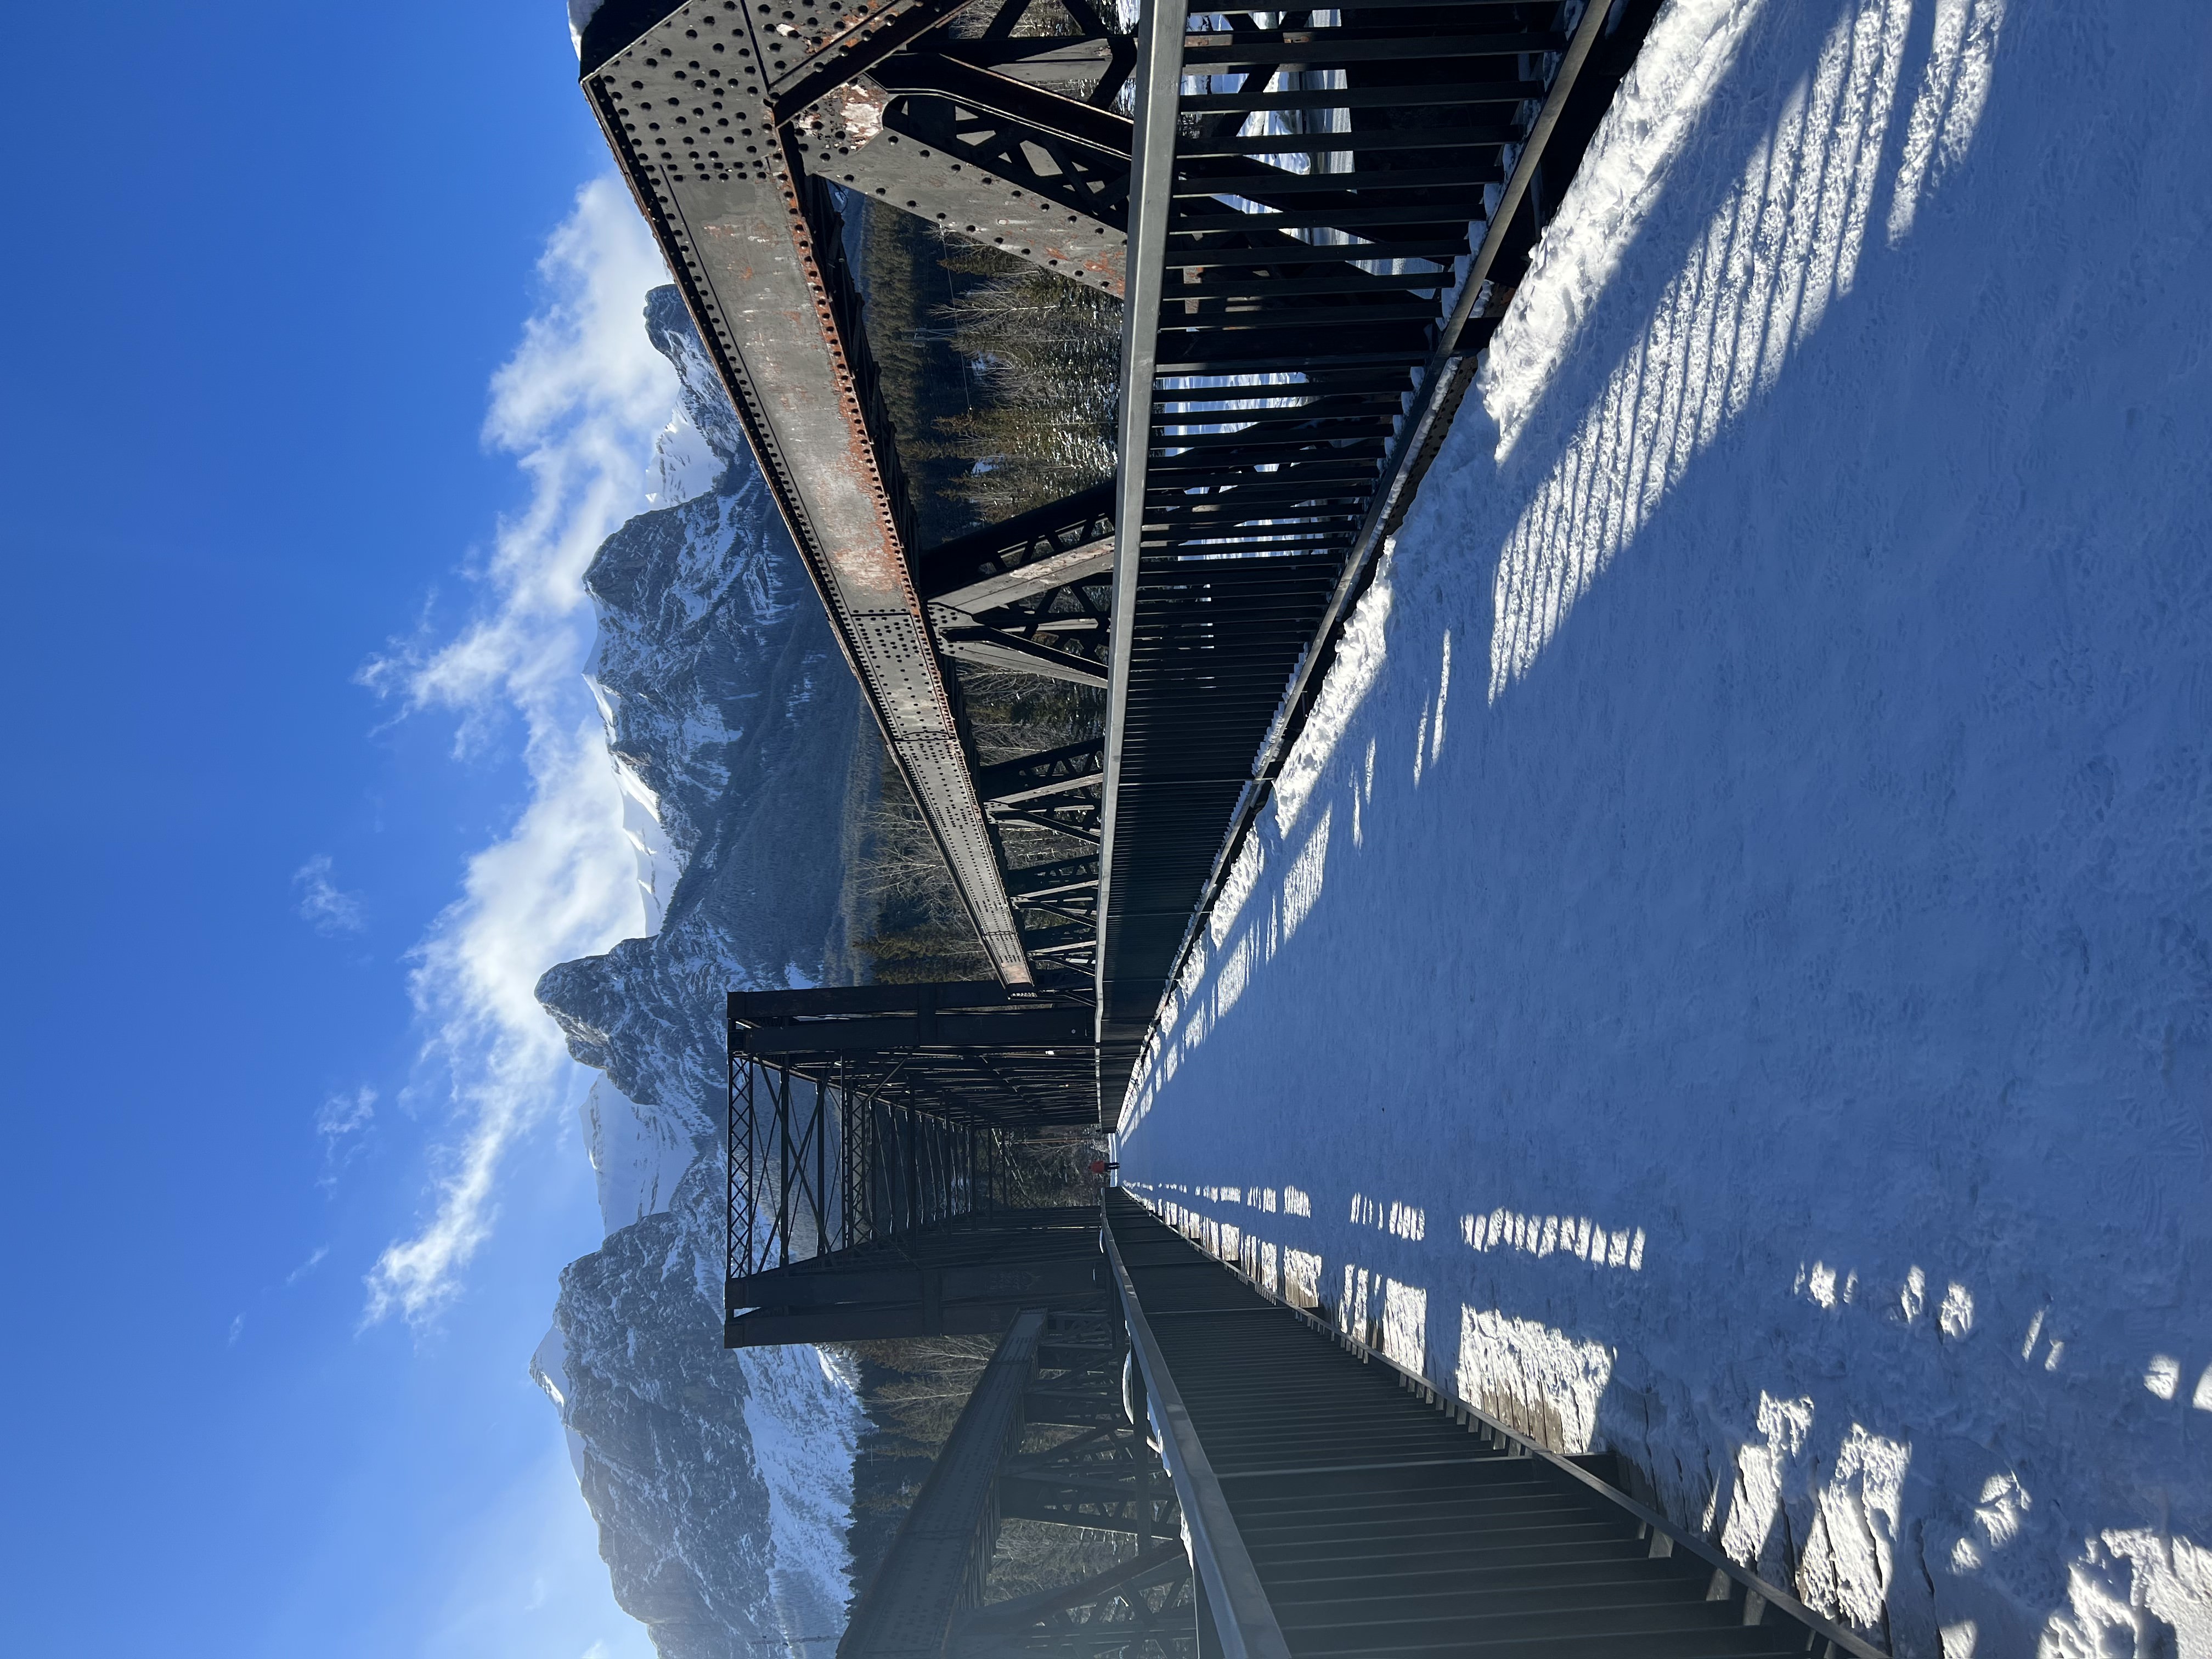 image of Canmore Engine Bridge in Canmore Alberta Canada. Filming Location for The Last of Us. Image taken from end of bridge with snow on ground, iron bridge either side of picture, mountains in background, blue sky.